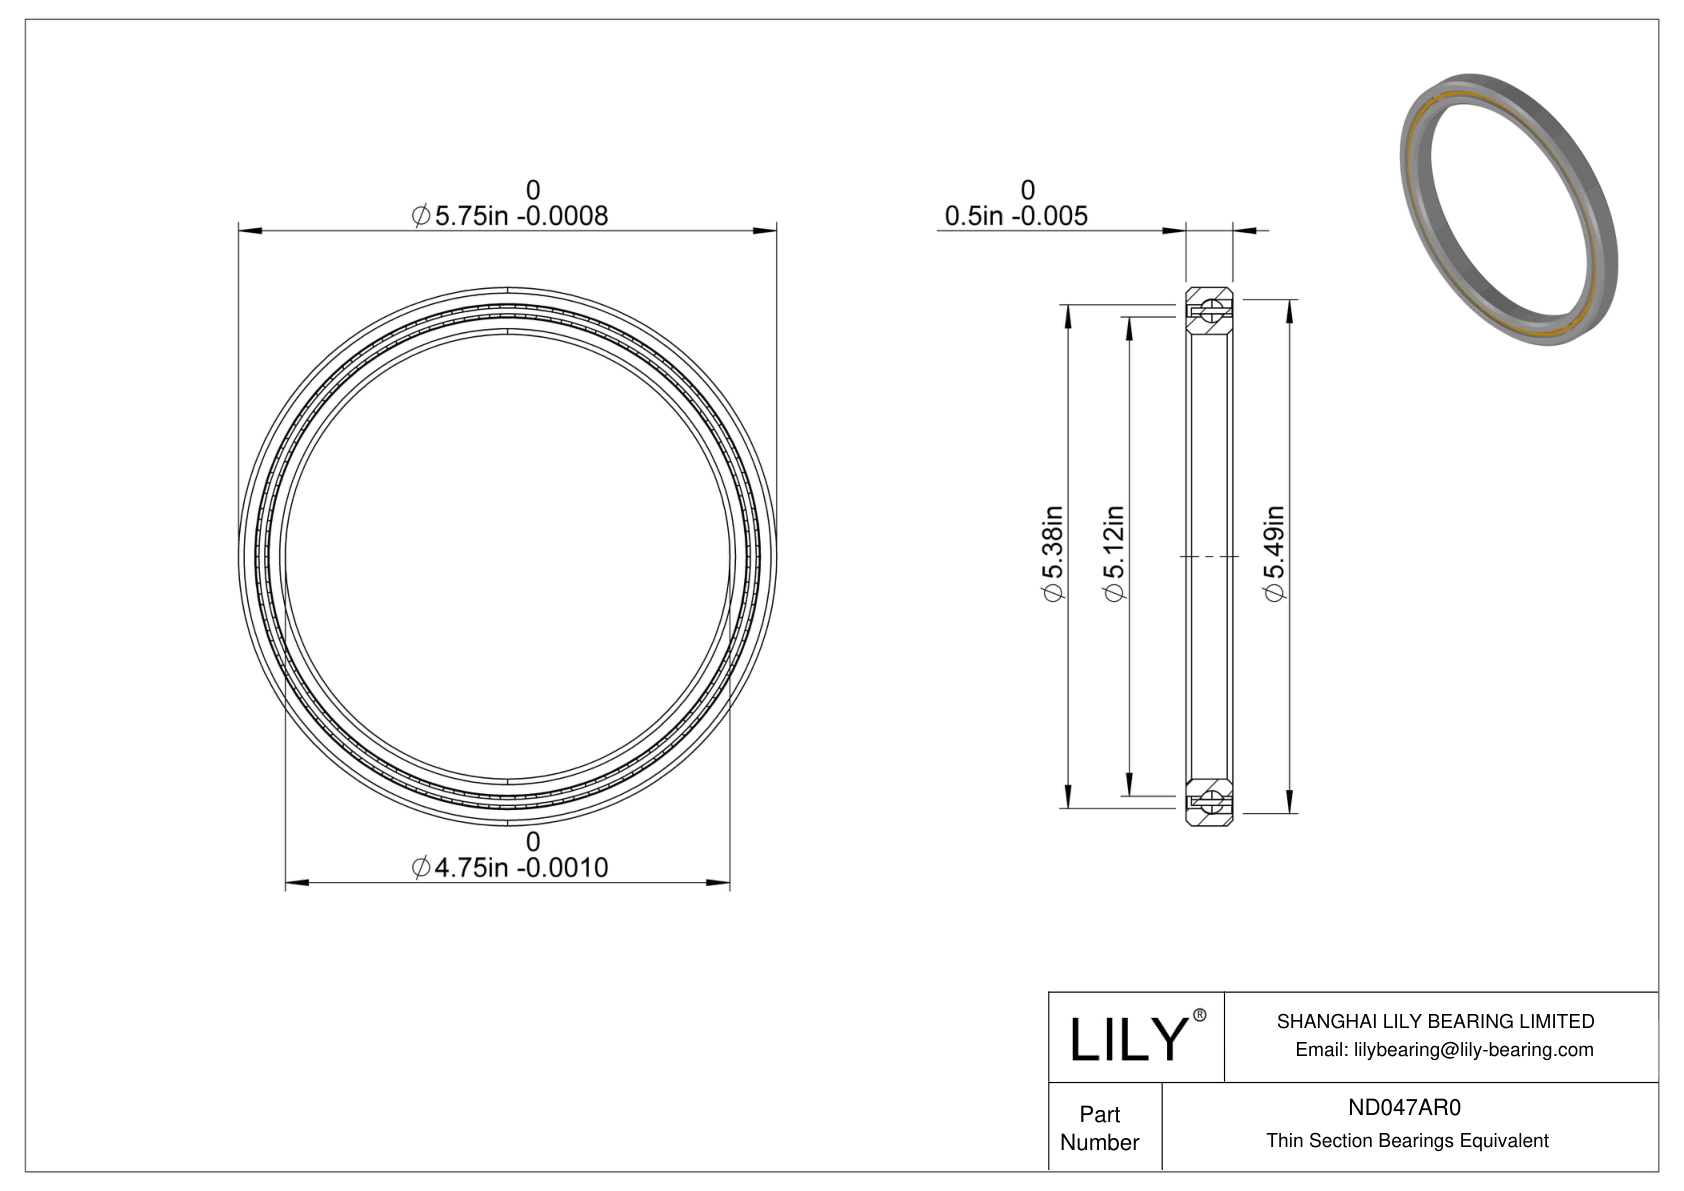 ND047AR0 Constant Section (CS) Bearings cad drawing